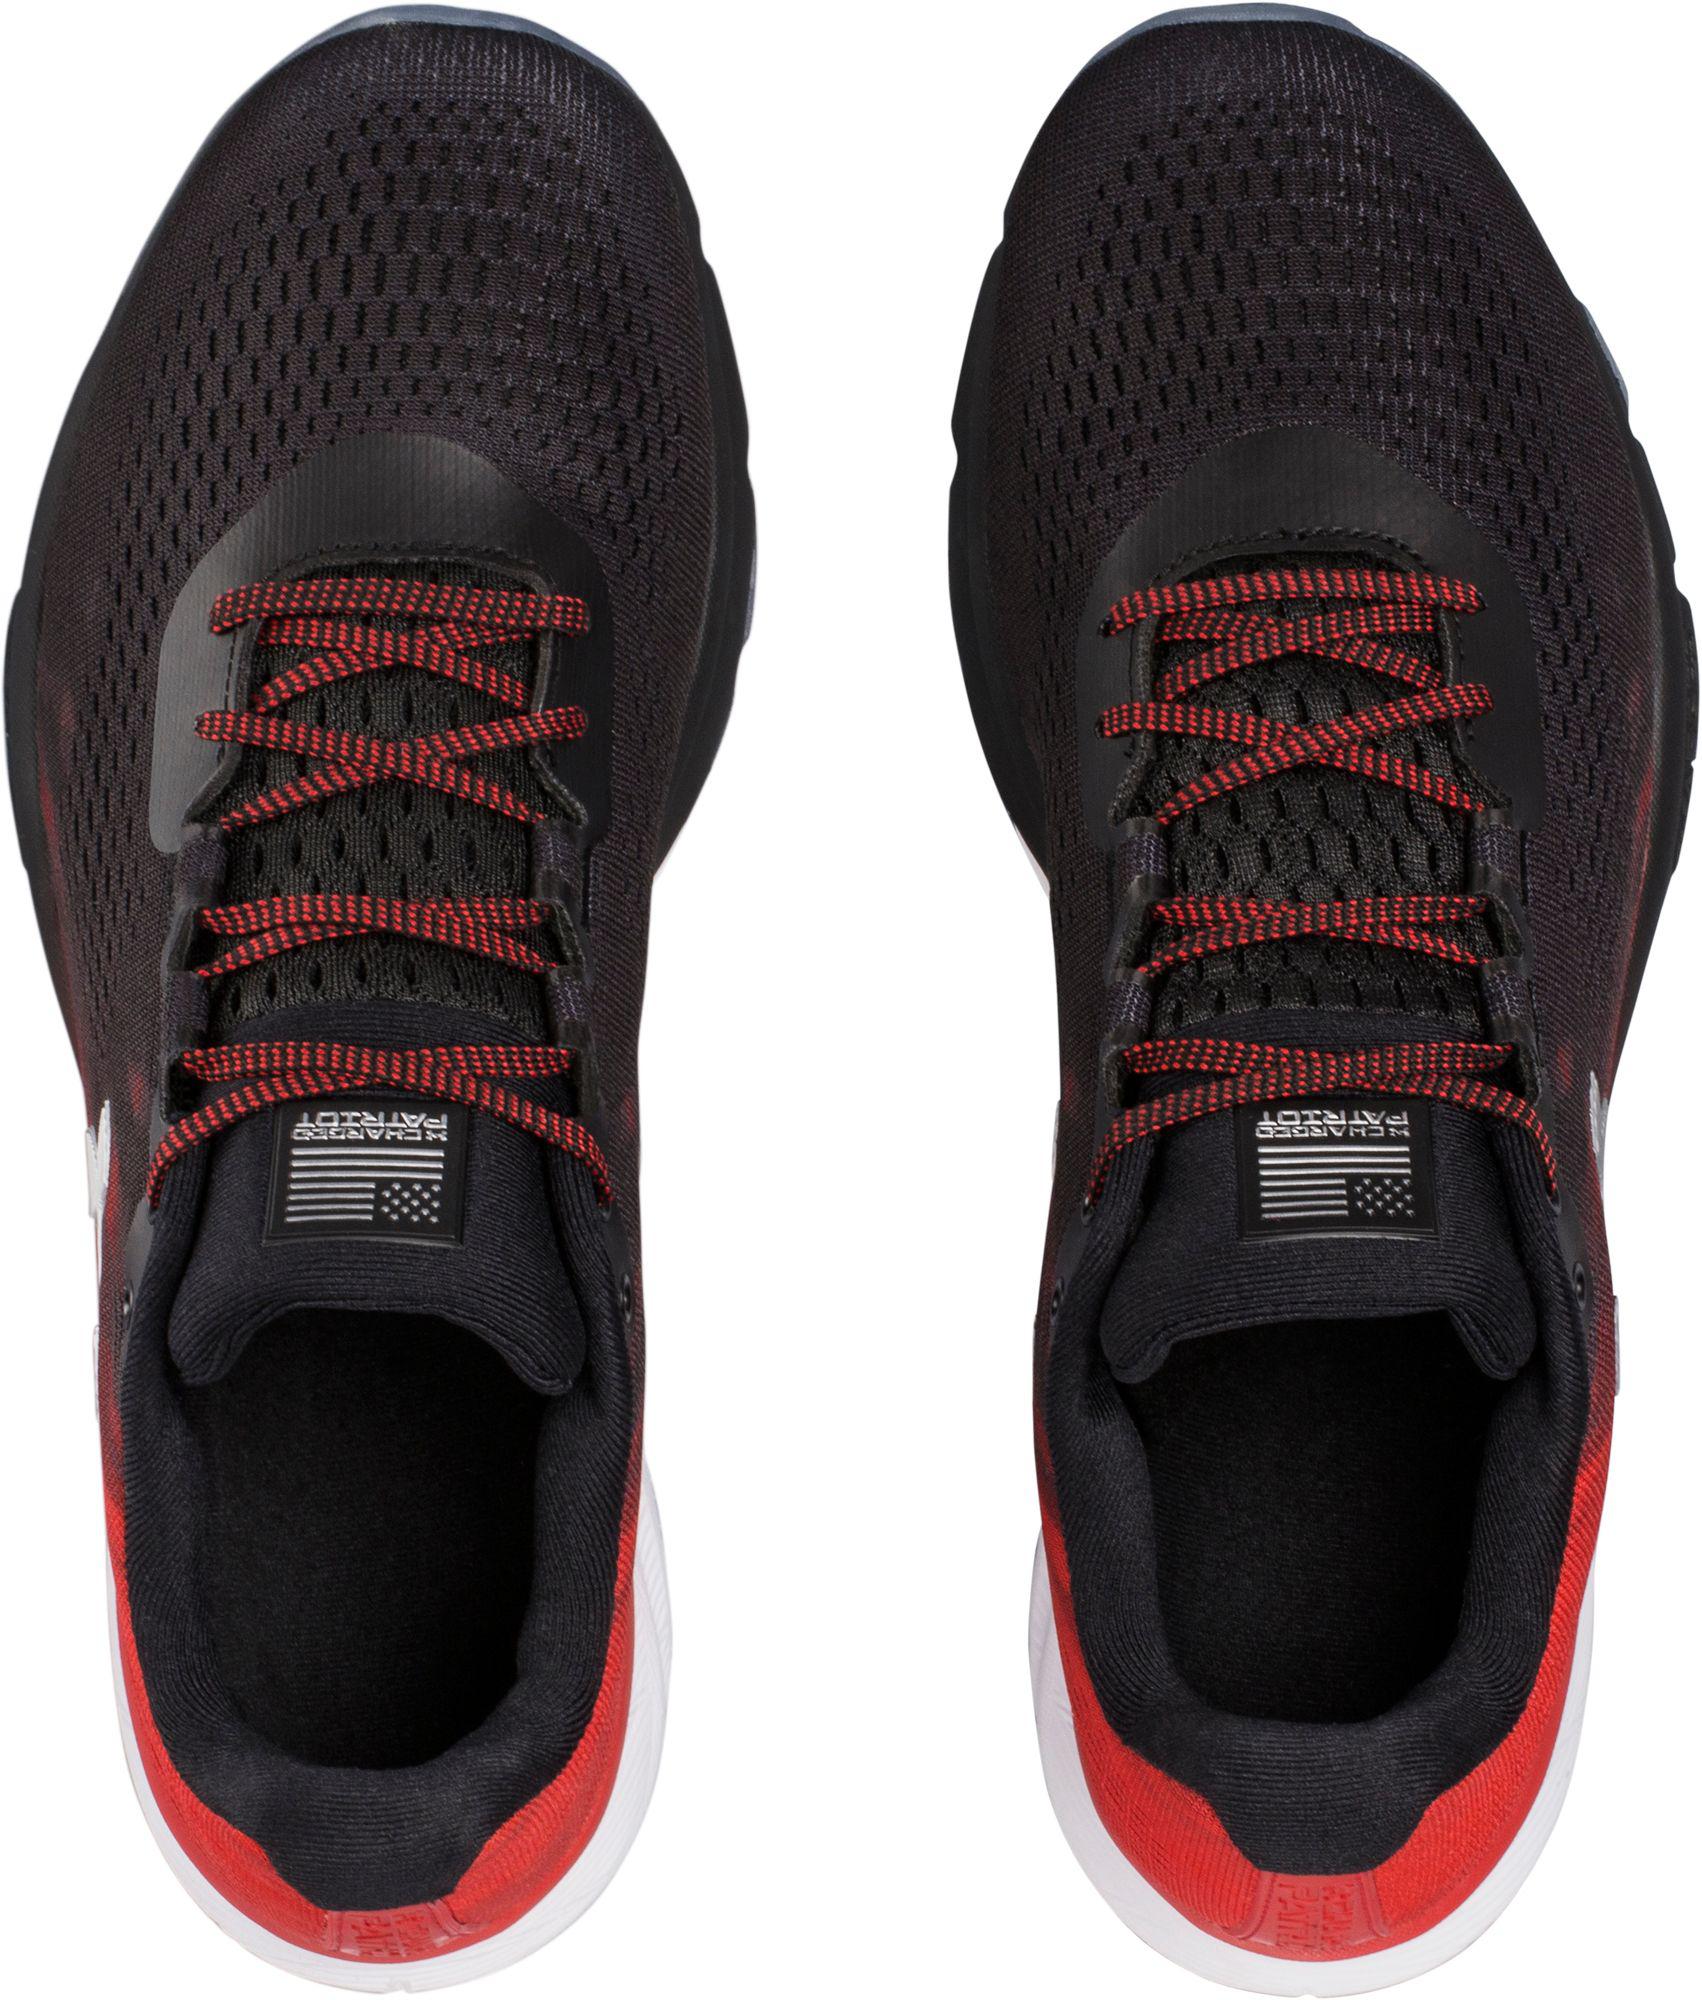 under armour charged patriot shoes